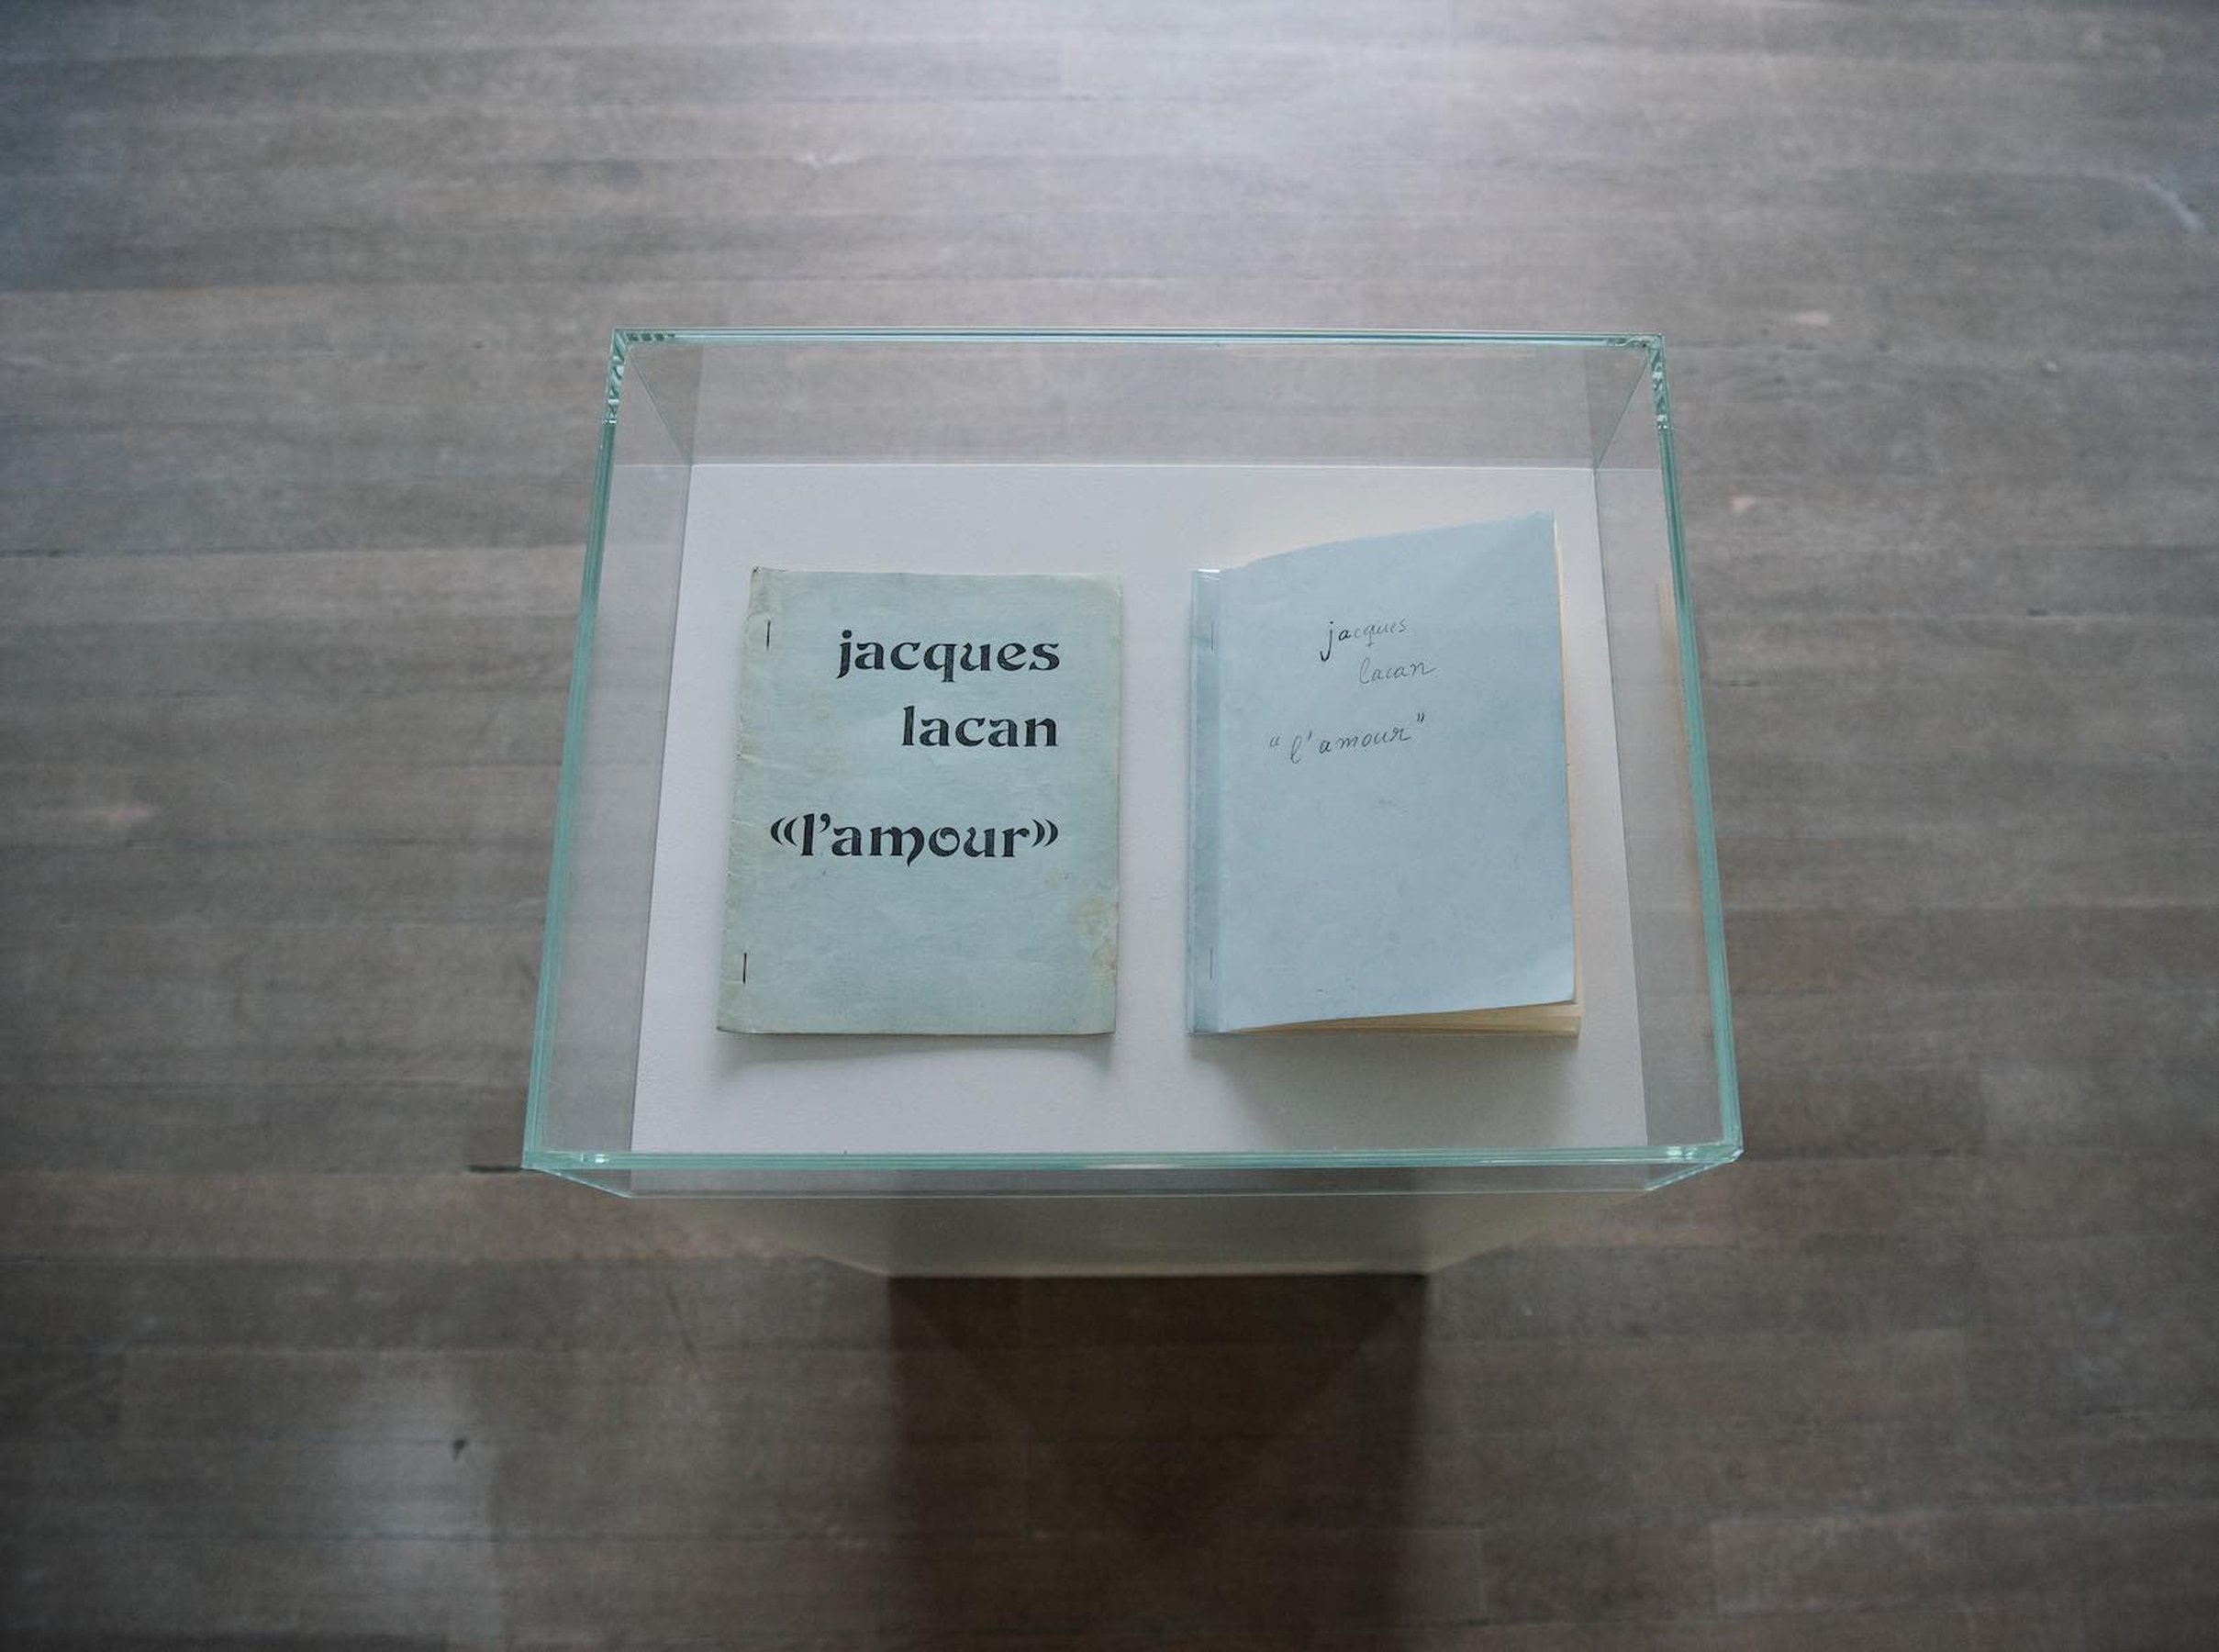 Dora Garcia L‘Amour, 2018 original pirate copy of the lecture "L‘Amour" by Jacques Lacan, double book created by annotating the first one, with original notes and drawings by the artists, pencil on paper.